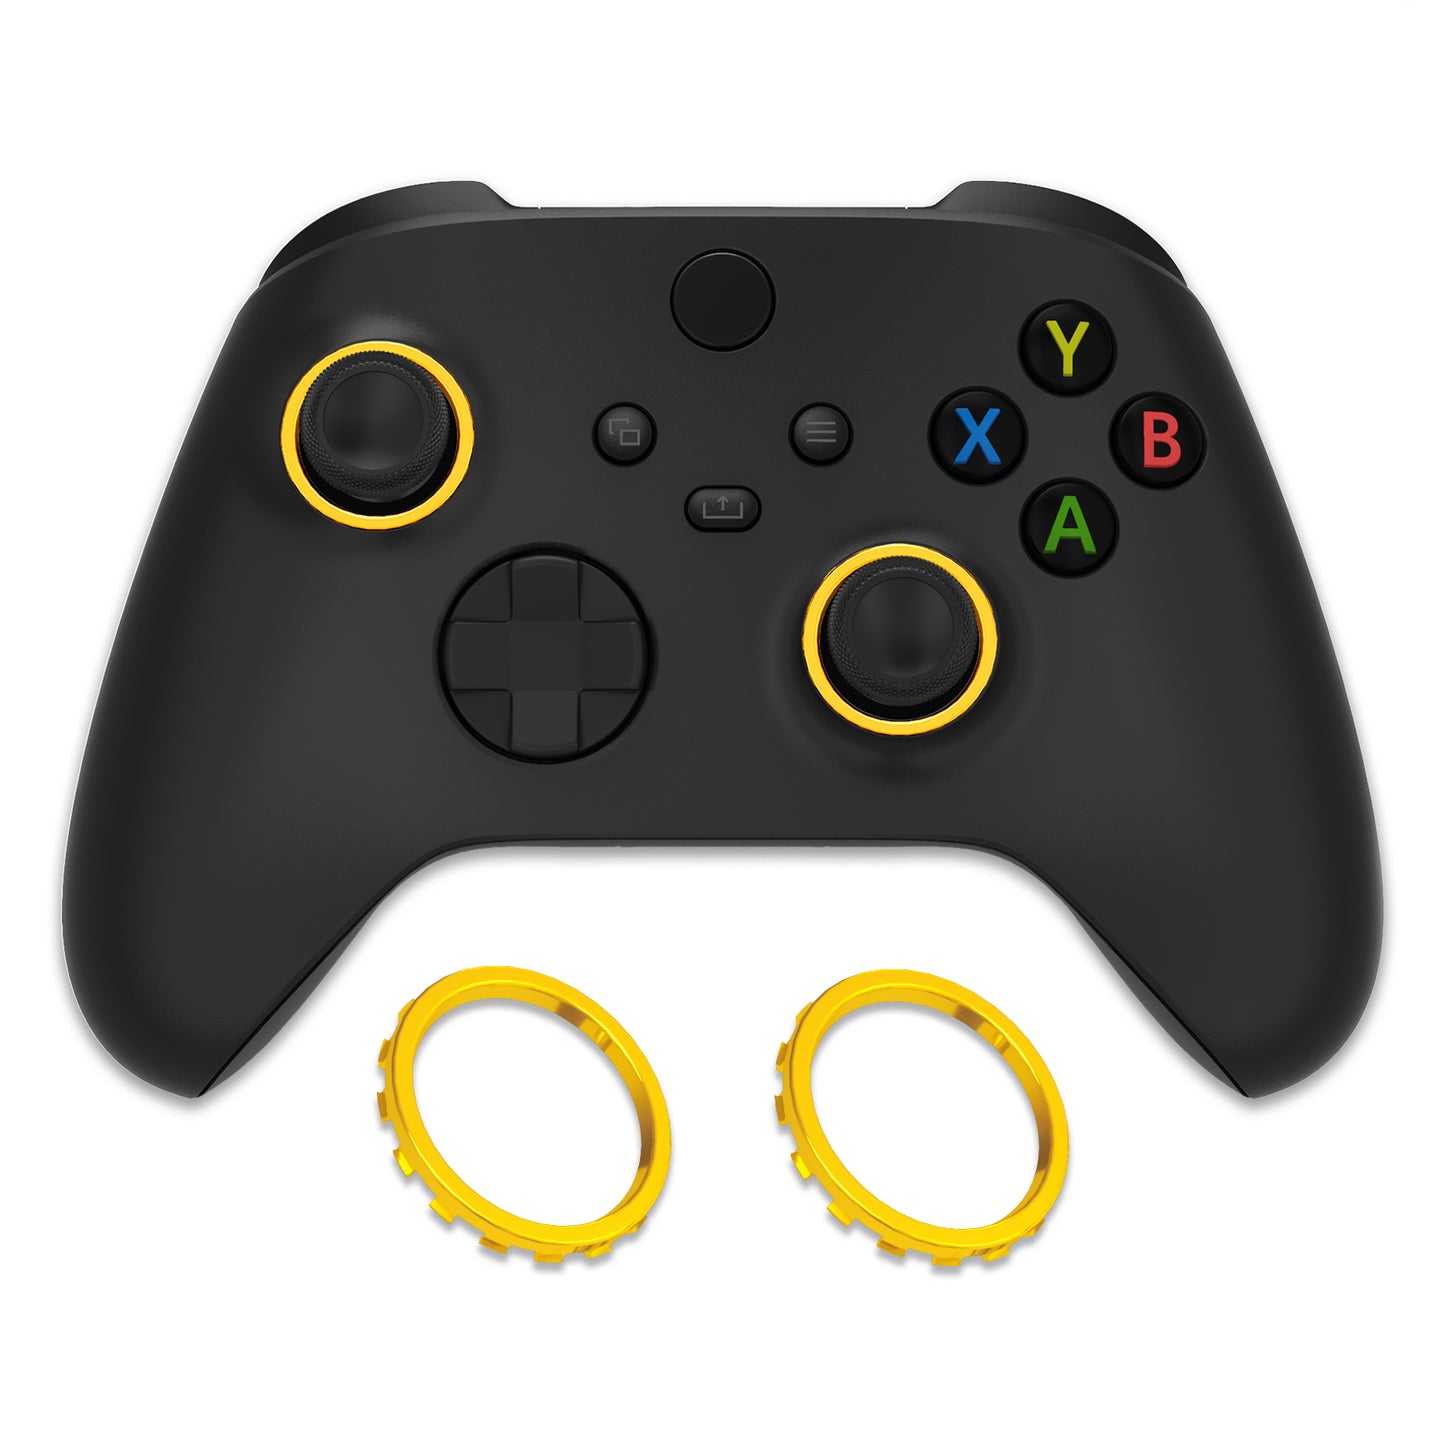 eXtremeRate Custom Accent Rings for eXtremeRate ASR Version Shell, Compatible with Xbox Series X/S Controller & Xbox One Elite (Model 1698) & Elite Series 2 (Model 1797 and Core Model 1797) Controller - Chrome Gold eXtremeRate